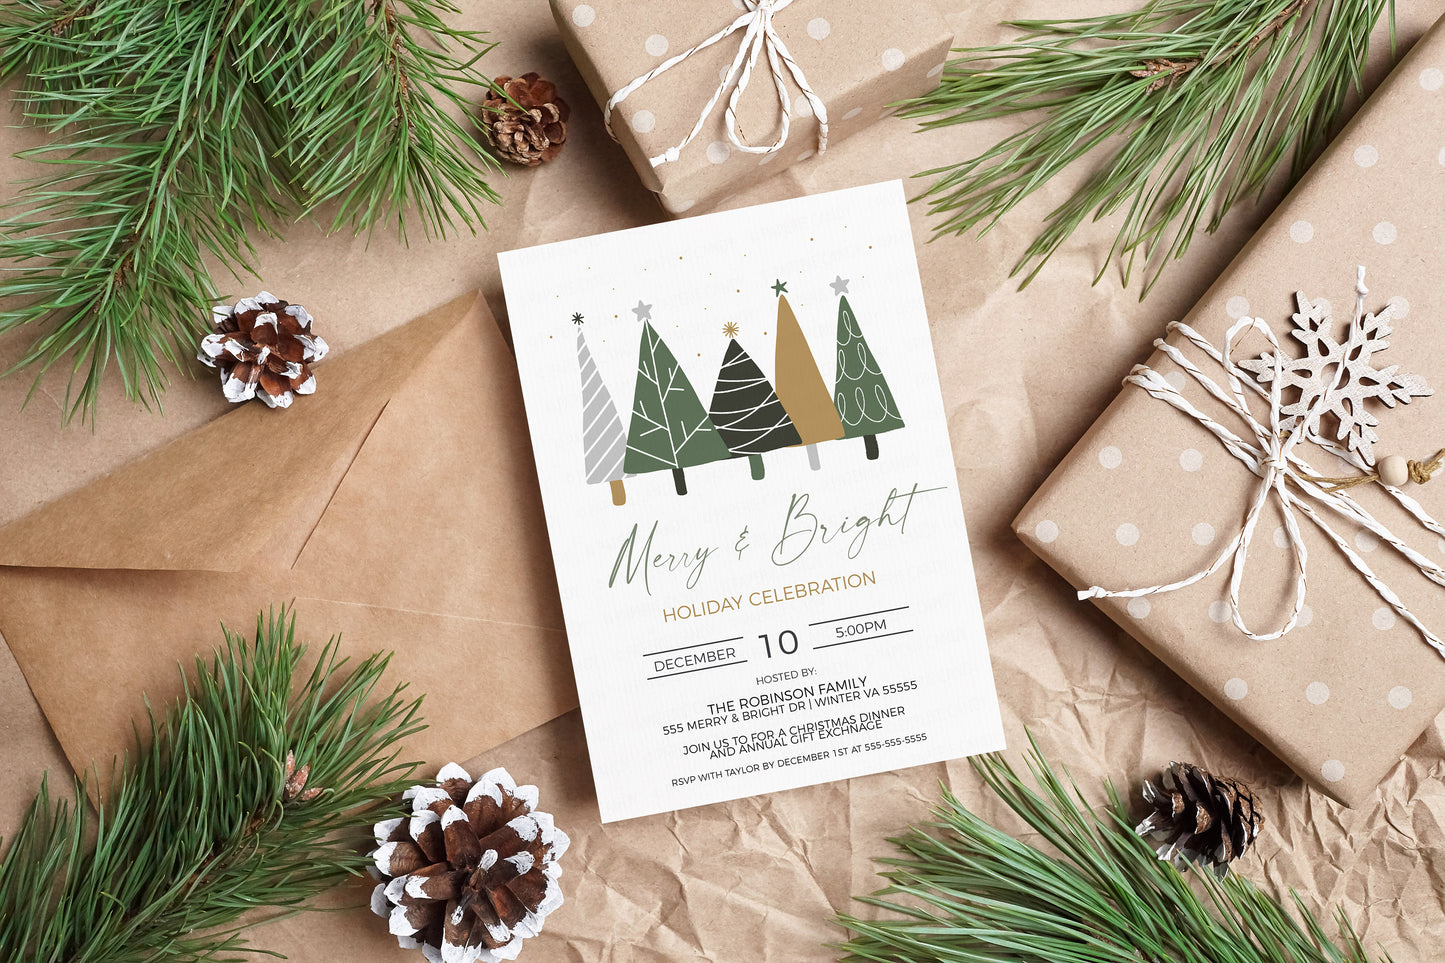 Merry And Bright Invitation, Editable Holiday Party Invite, Christmas Trees, Company Work Event, Christmas Lunch Dinner Luncheon, Printable